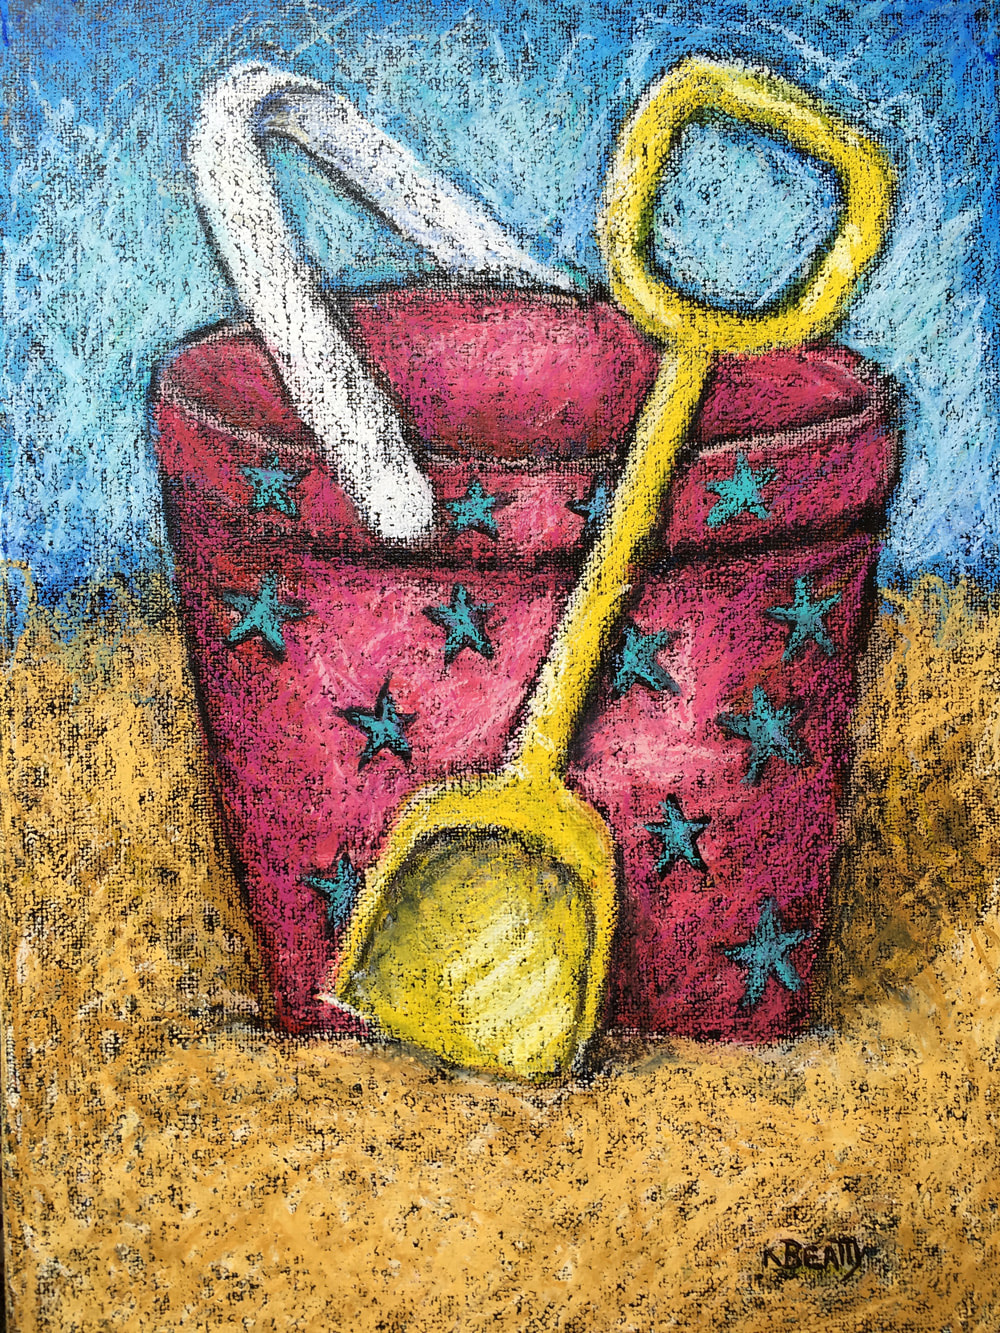 This oil pastel painting is in a unique scribble technique, featuring a pink sand pail with blue stars, and a yellow shovel on a sandy beach.